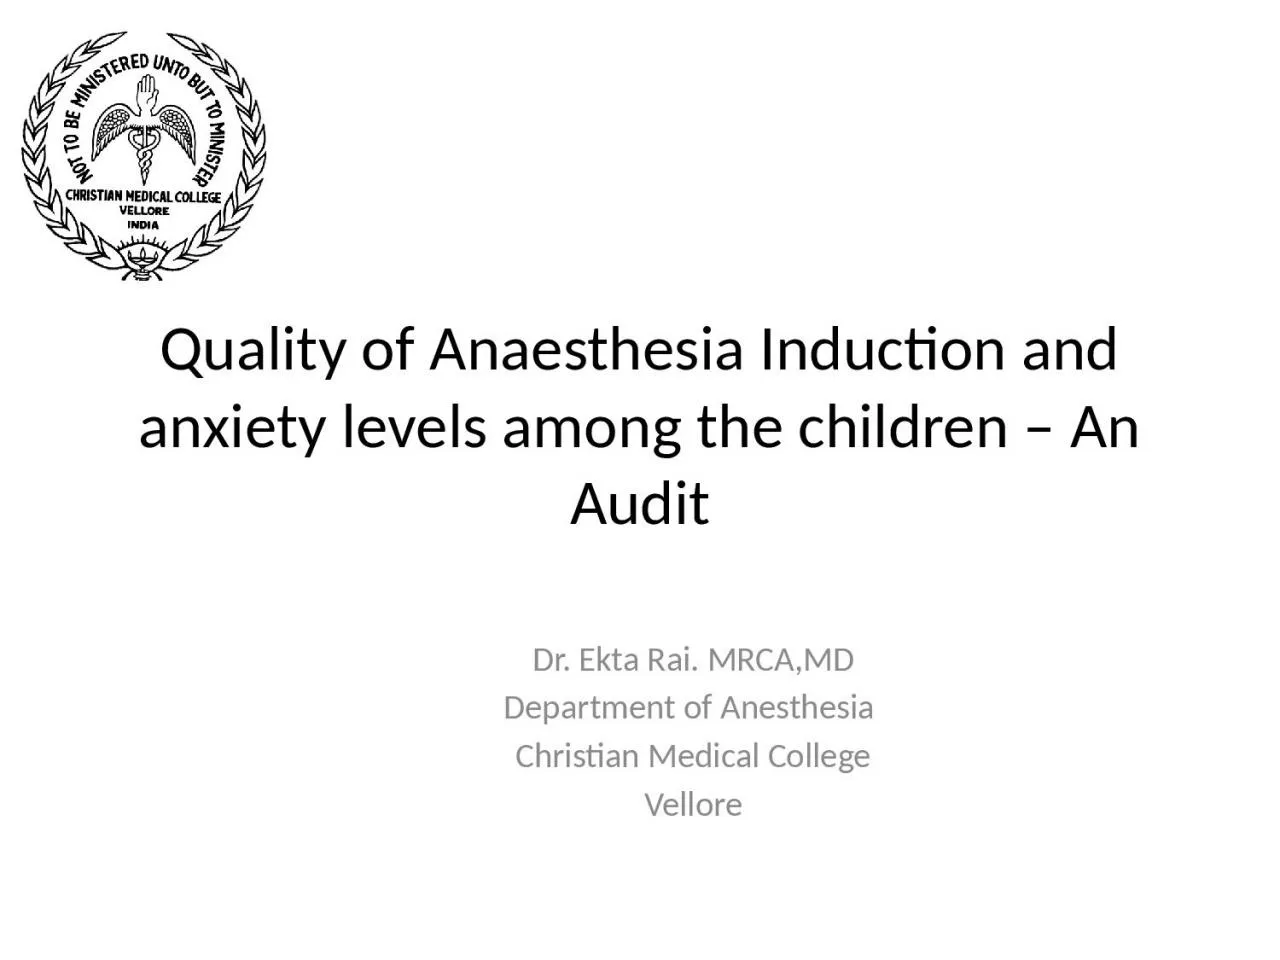 Quality of Anaesthesia Induction and anxiety levels among the children – An Audit